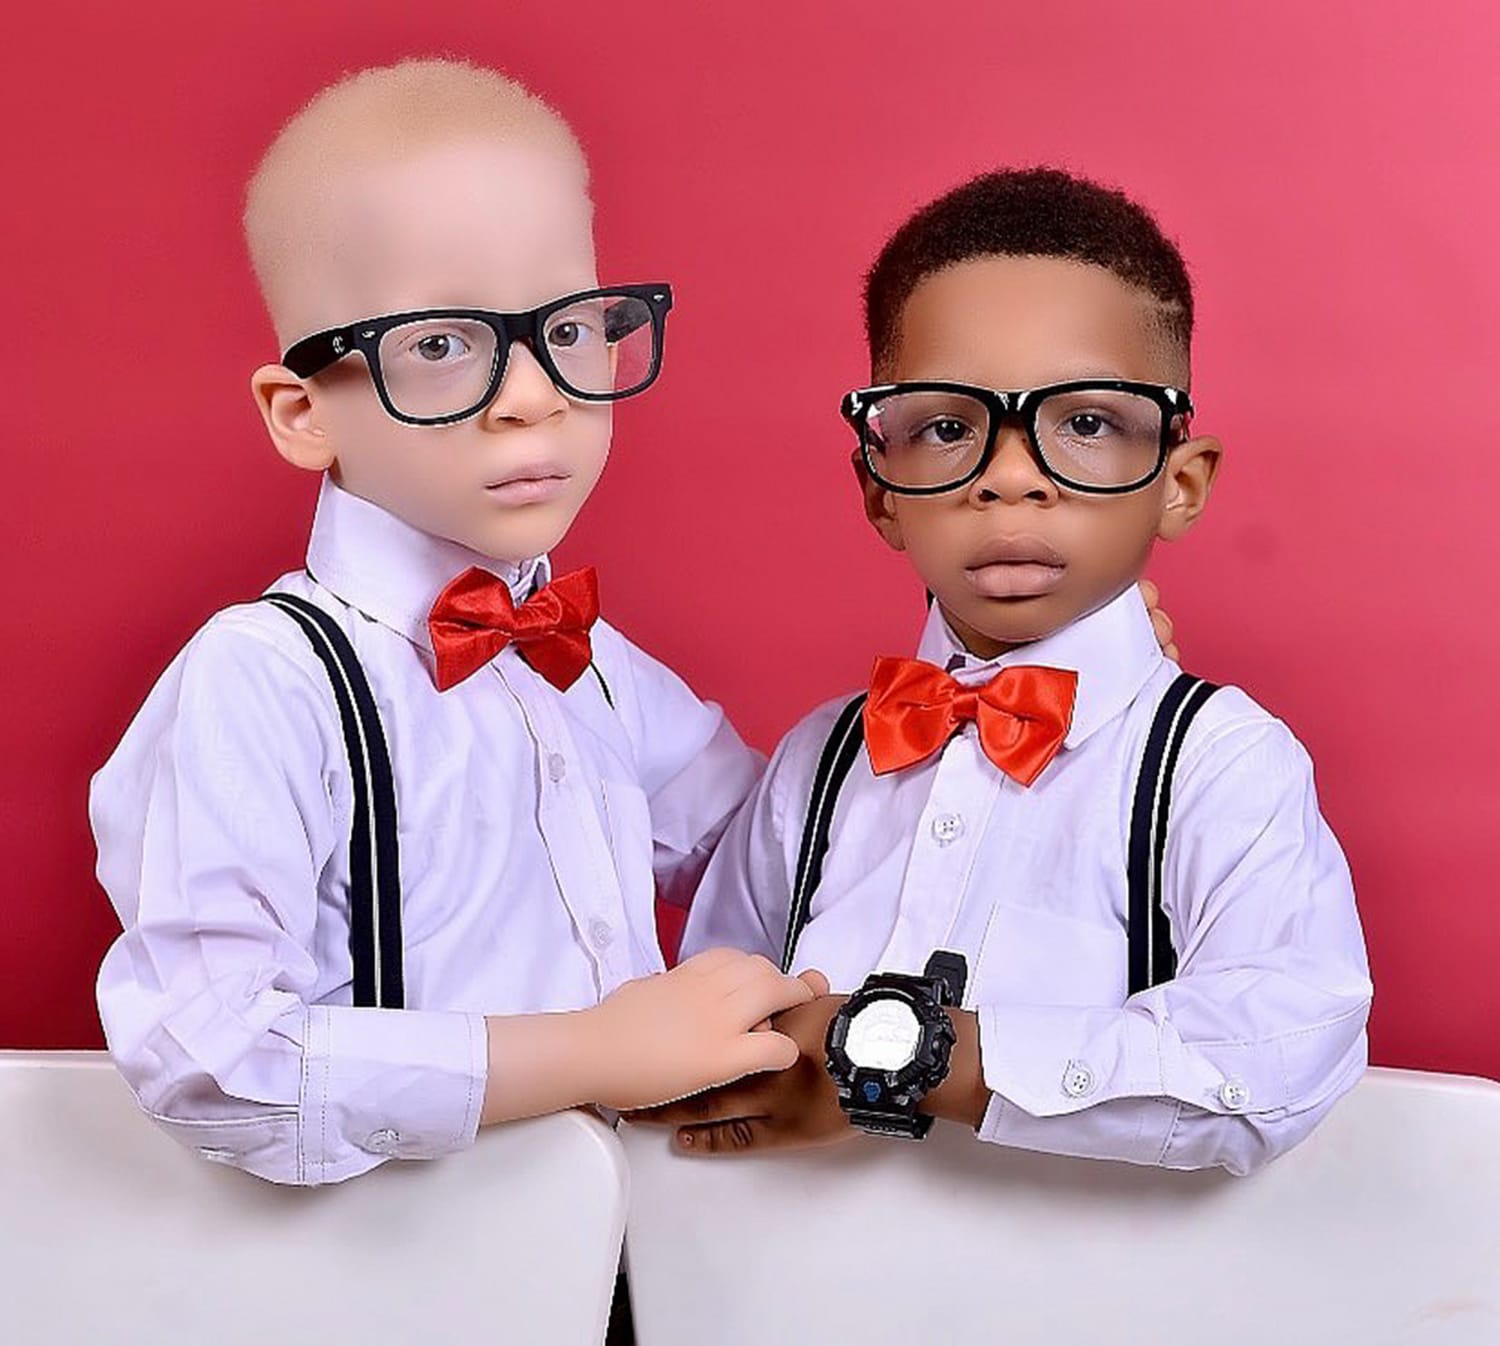 Twins - One With Albinism, One Without - Are Best Friends